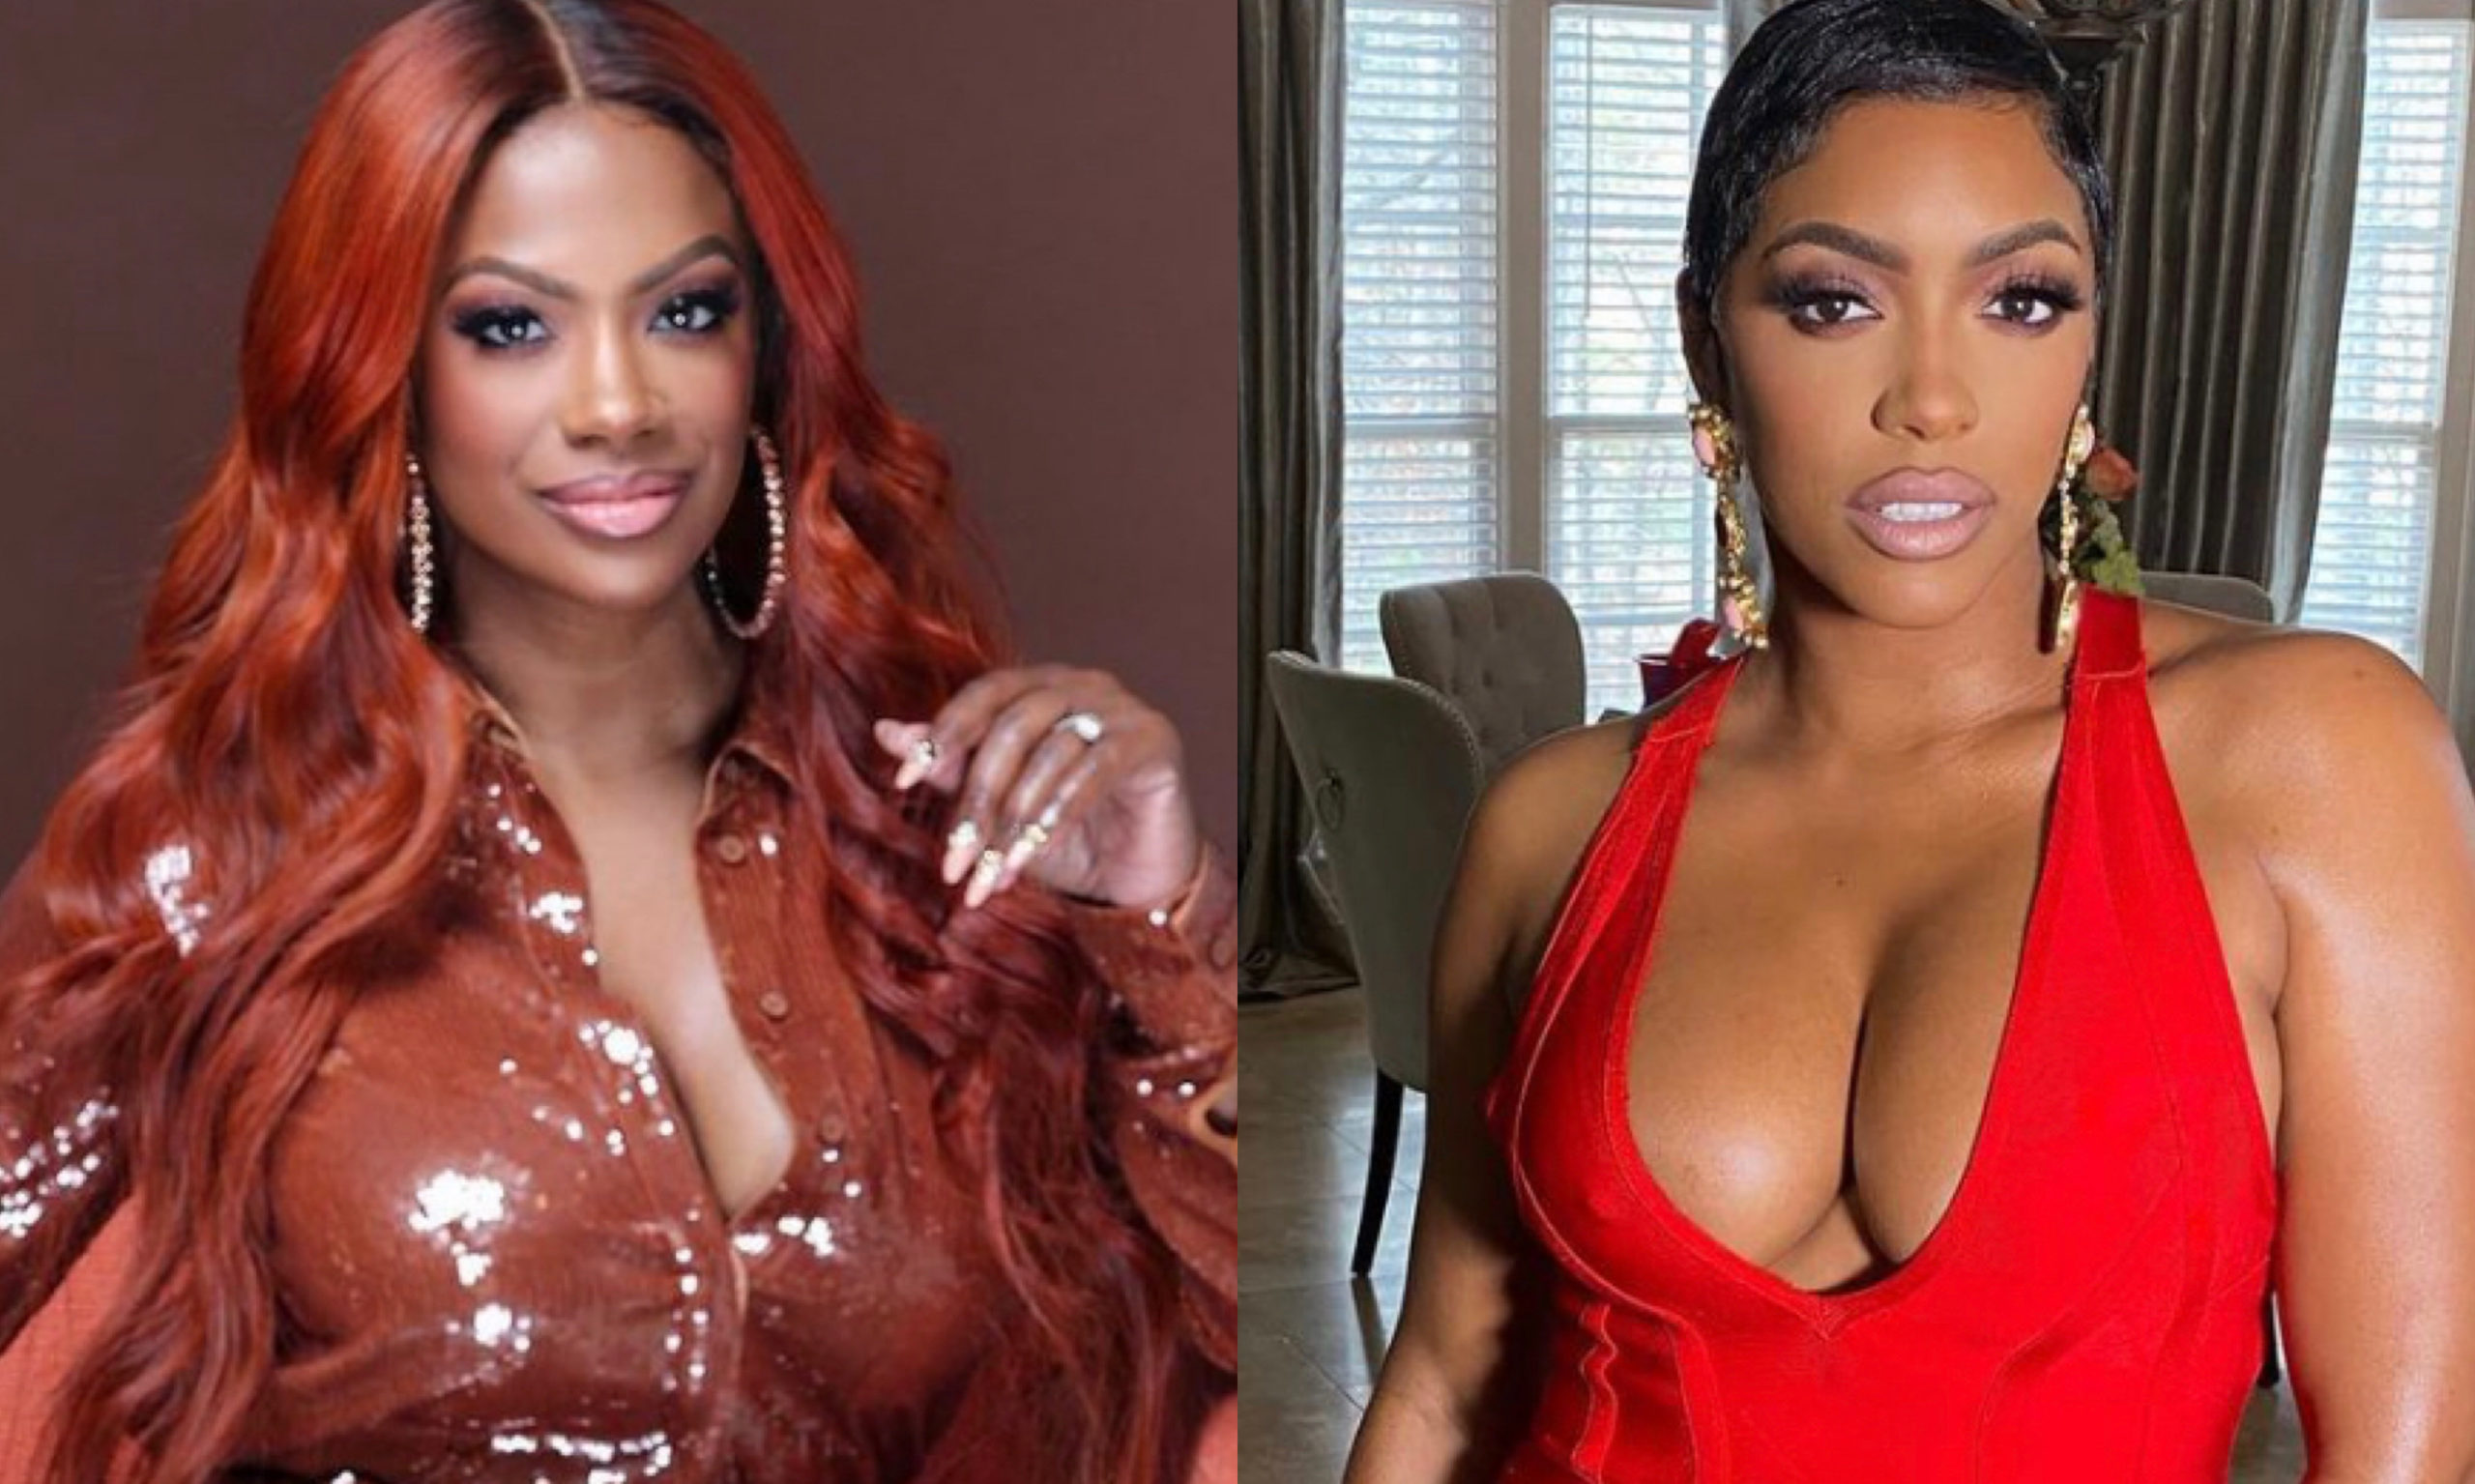 Fans Praise Kandi Burruss and Porsha Williams' Friendship After the Singer Posted a Birthday Shoutout for Her Former Cast Mate